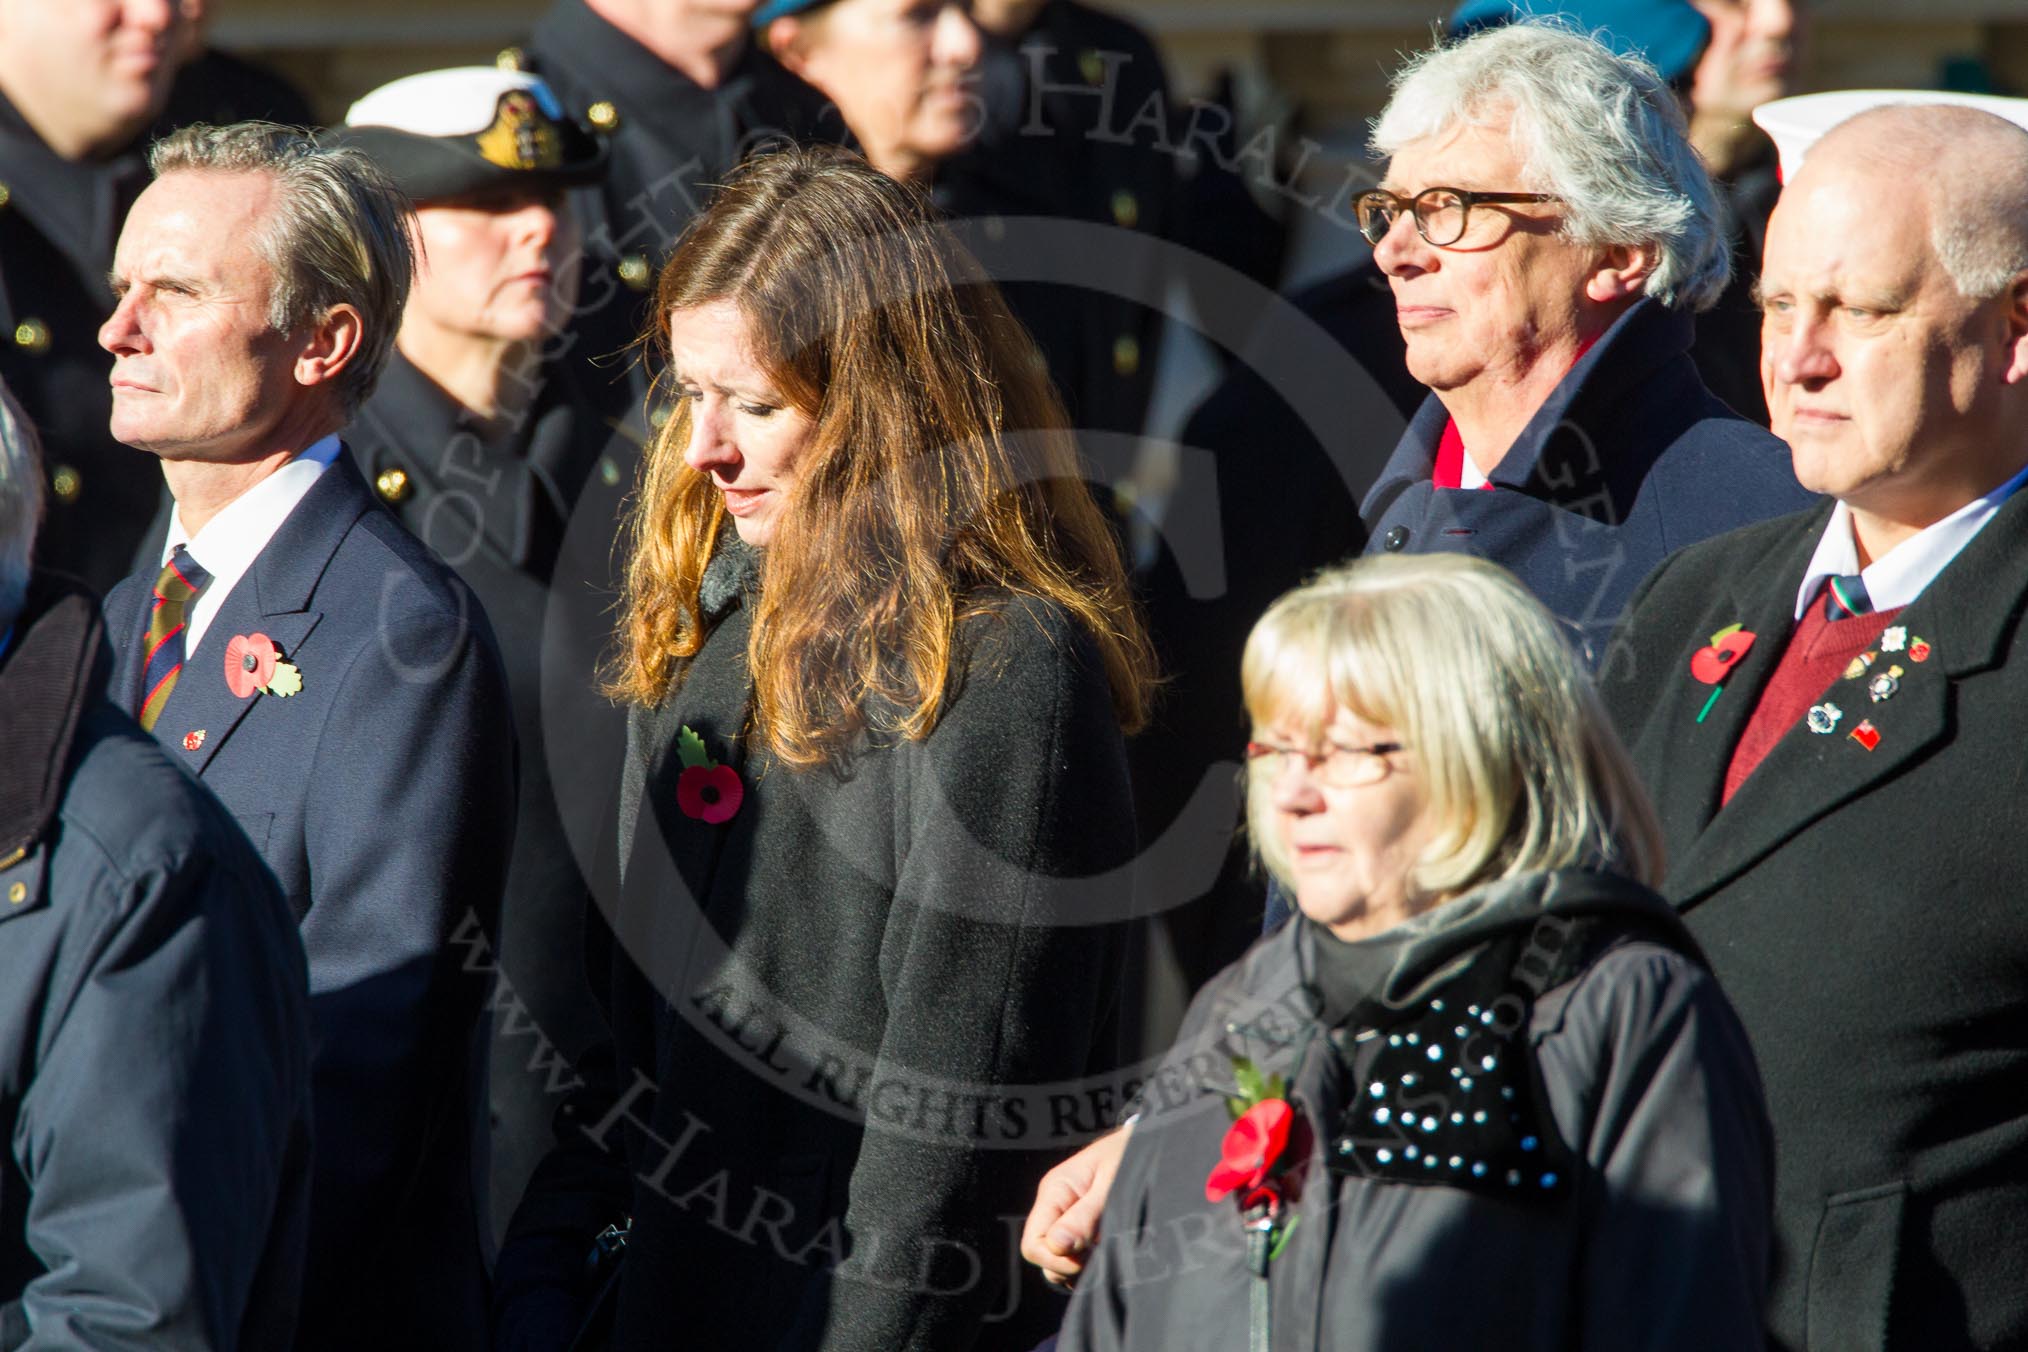 Remembrance Sunday Cenotaph March Past 2013: E1 - Merchant Navy Association..
Press stand opposite the Foreign Office building, Whitehall, London SW1,
London,
Greater London,
United Kingdom,
on 10 November 2013 at 11:44, image #345